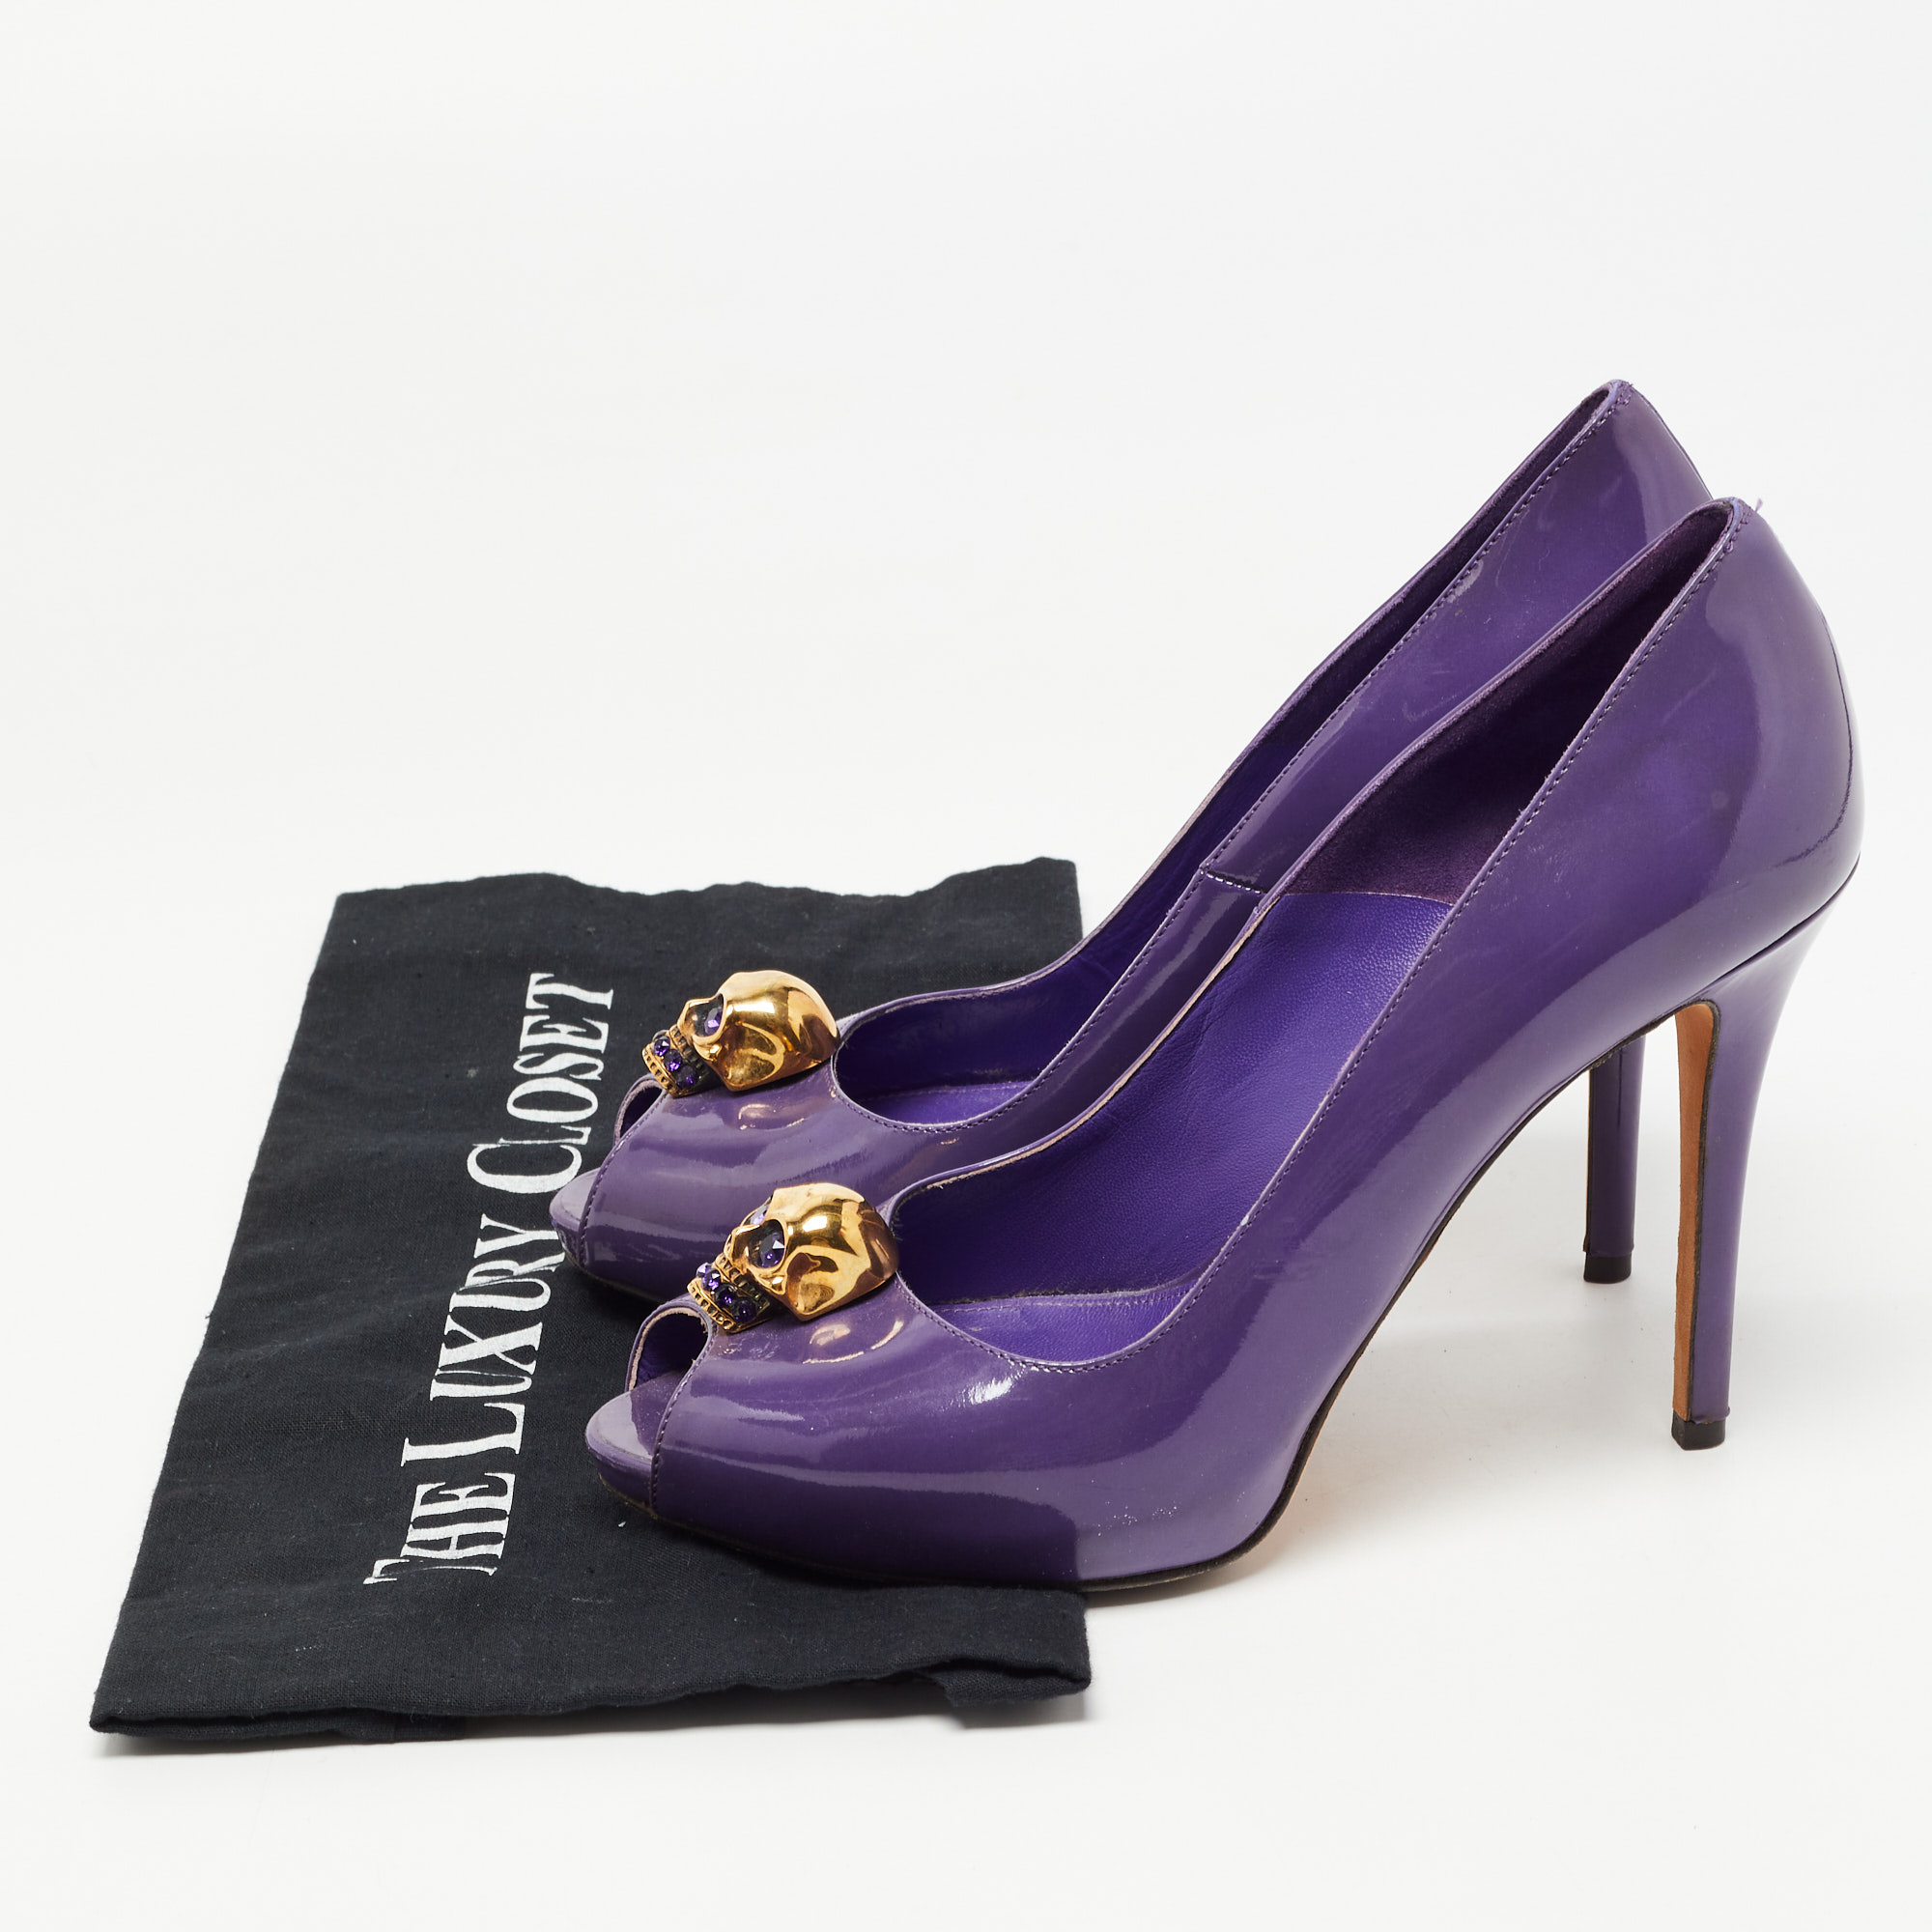 Alexander McQueen Purple Patent Leather Crystal Embellished Skull Peep Toe Pumps Size 38